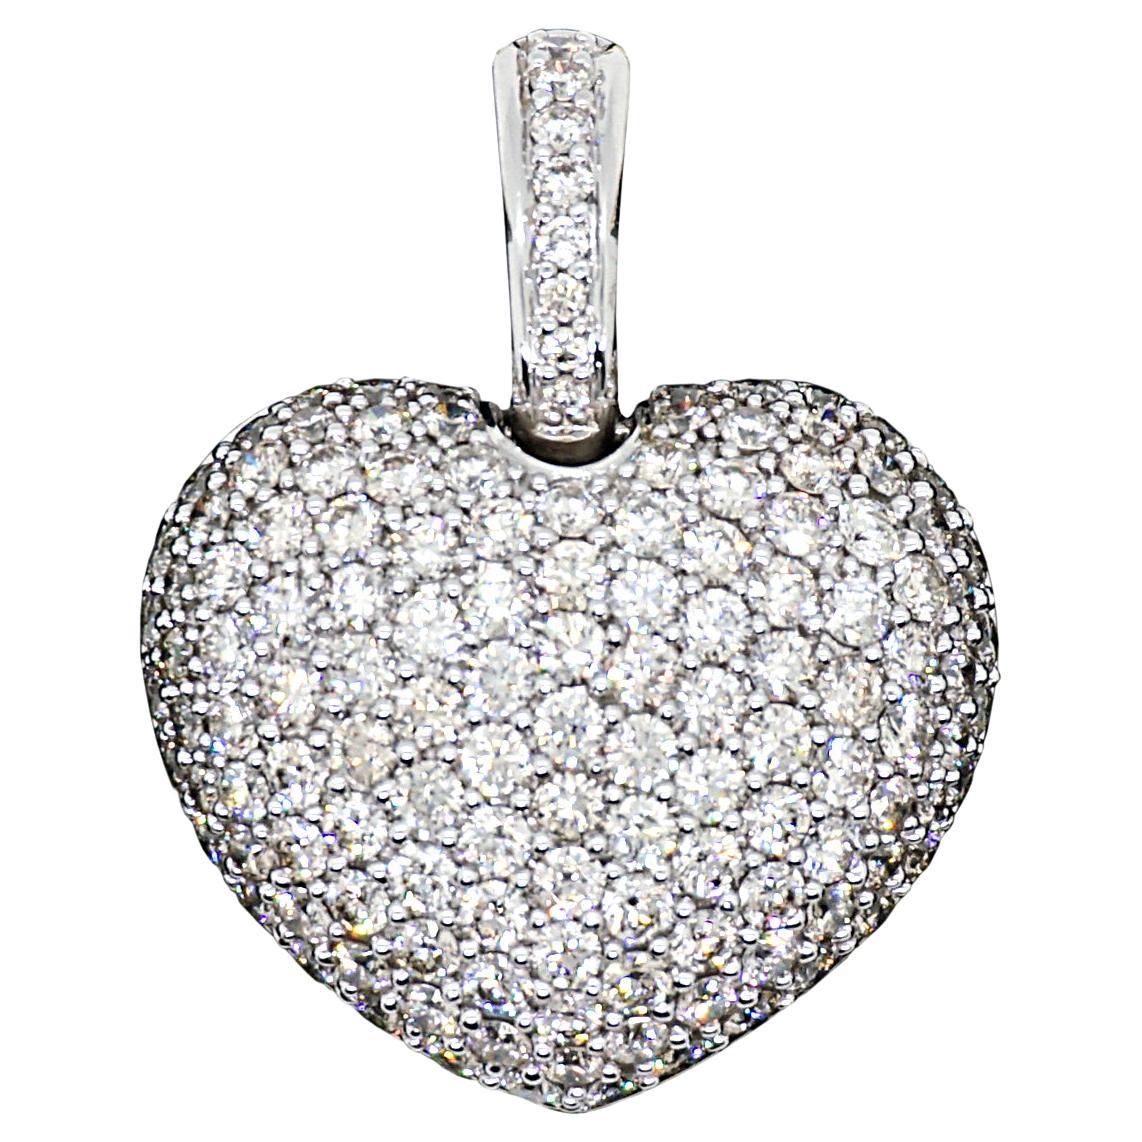 Heart-Shaped Pendant Clip With Numerous Diamonds 4.85 ct White Gold 18k